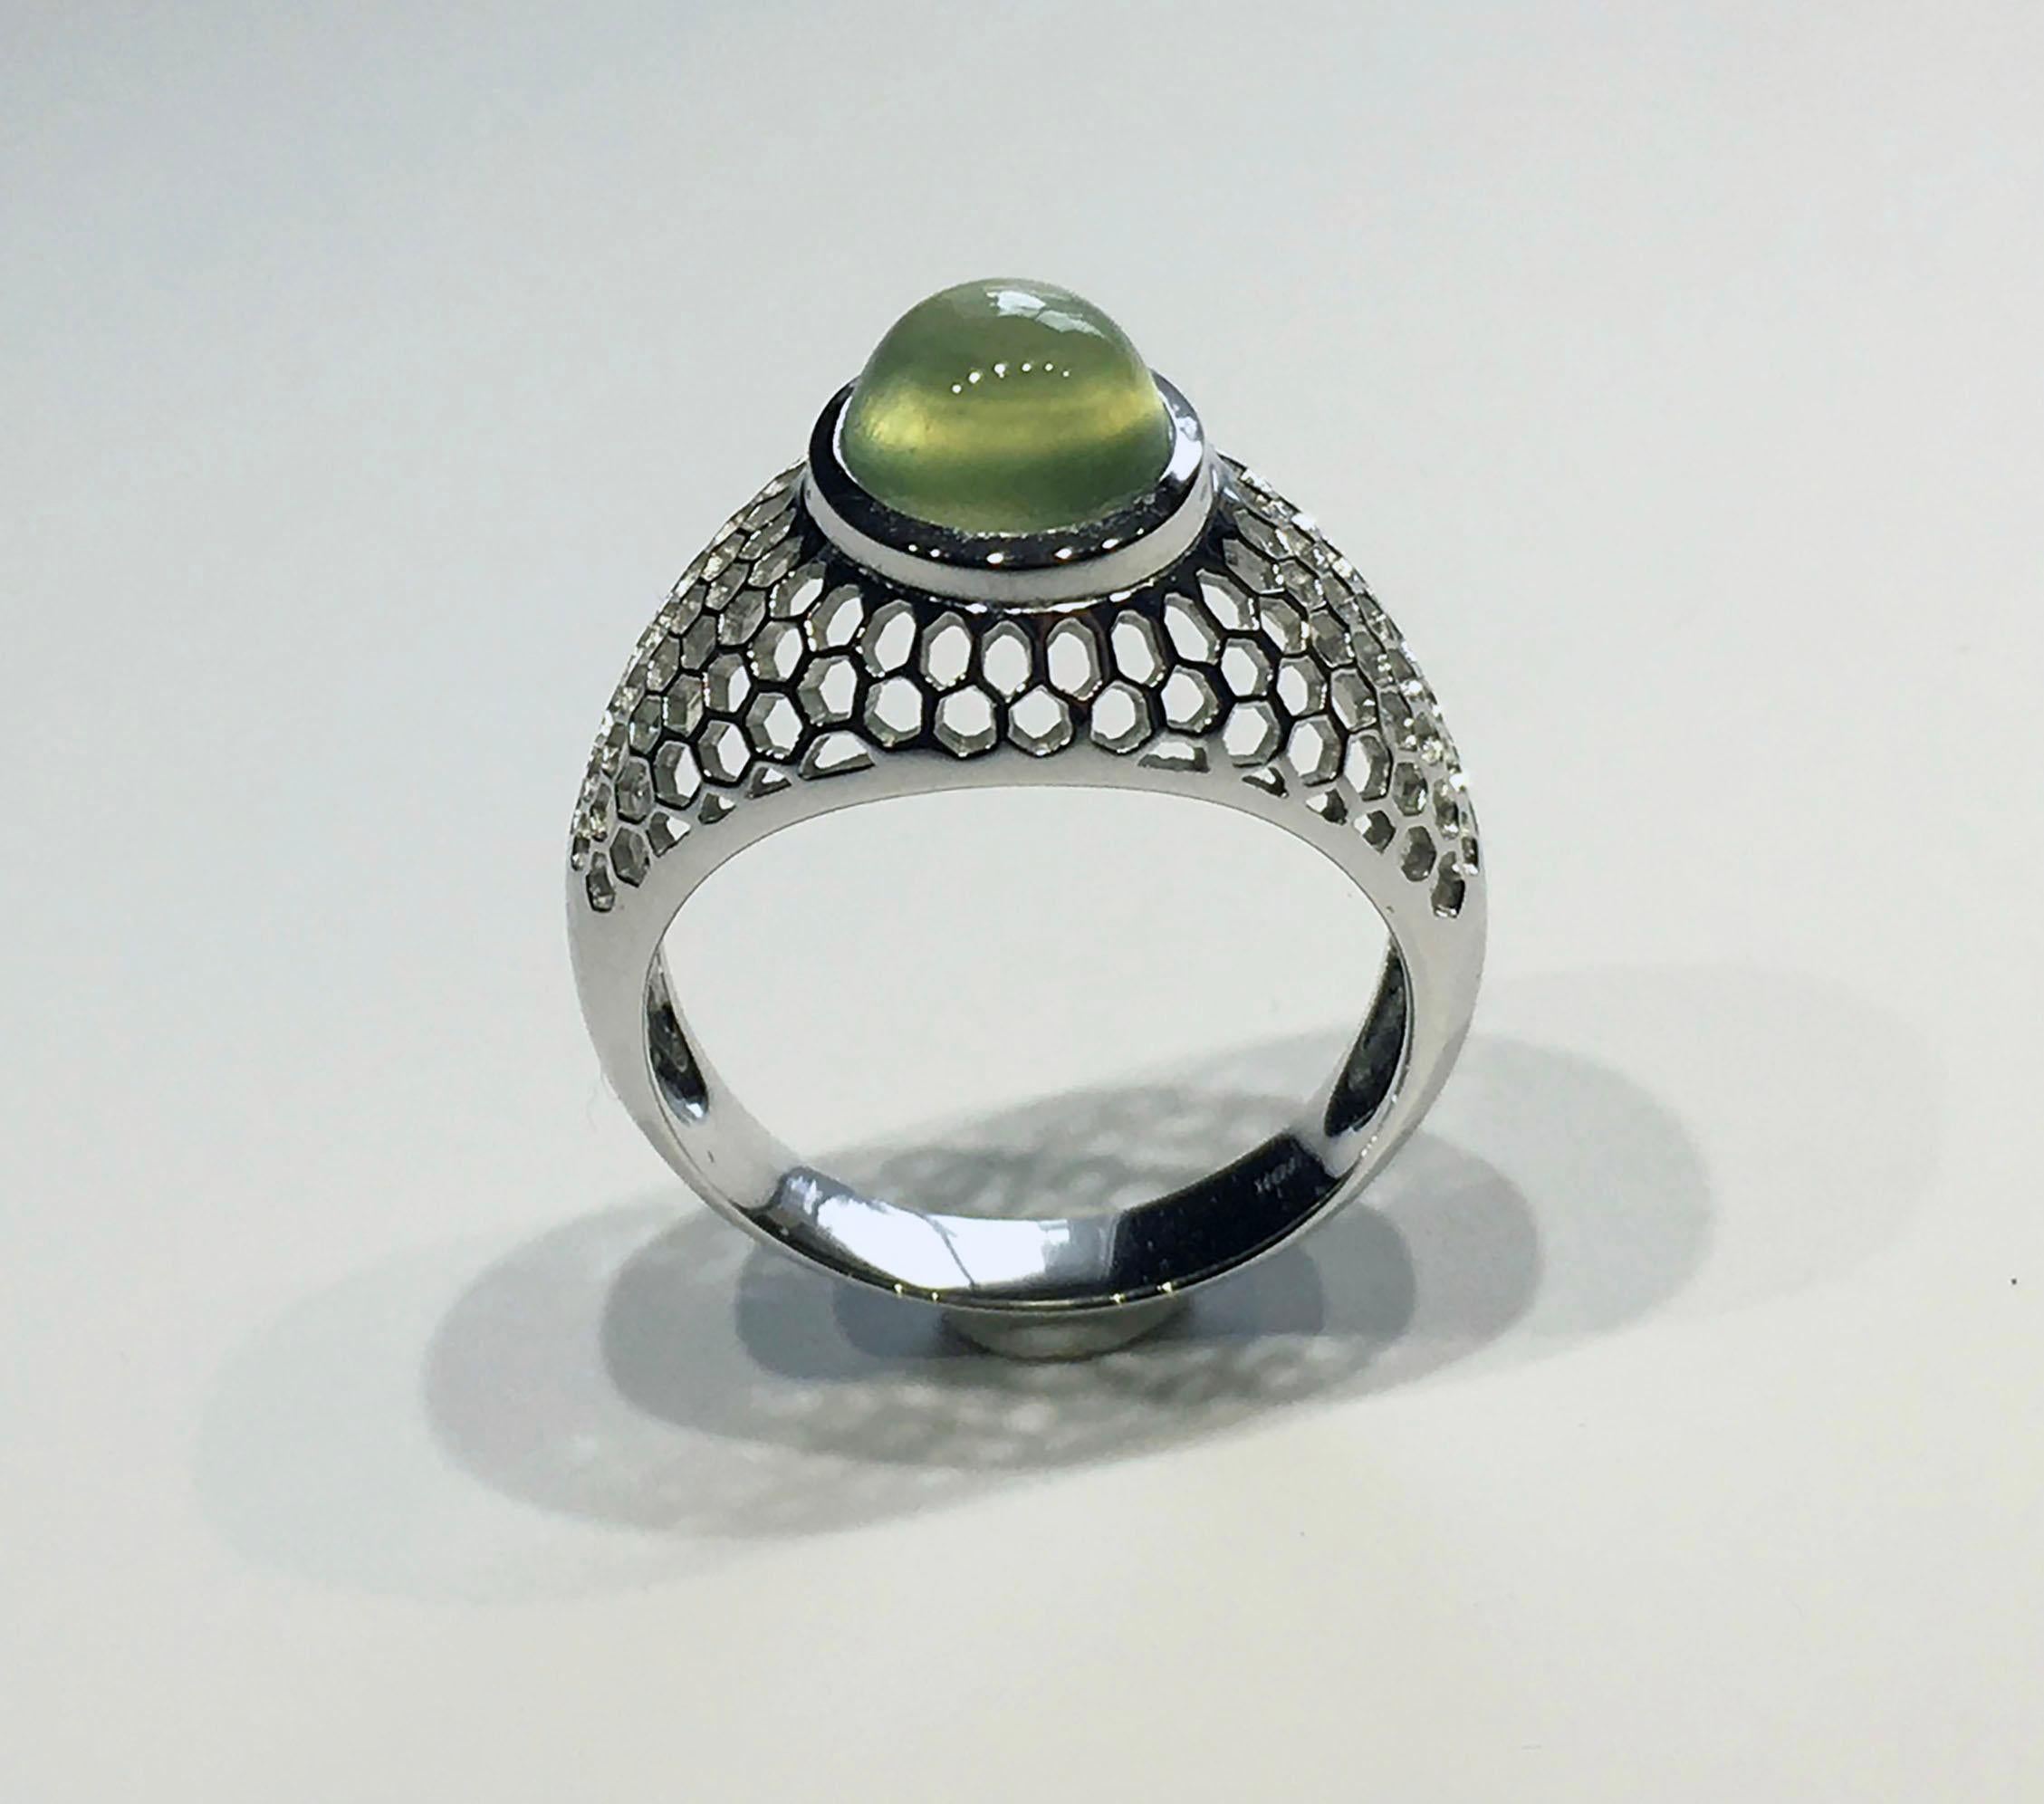 An Green Zambian Prehnite Cabochon Ring set in 18kt White Gold For Sale 4